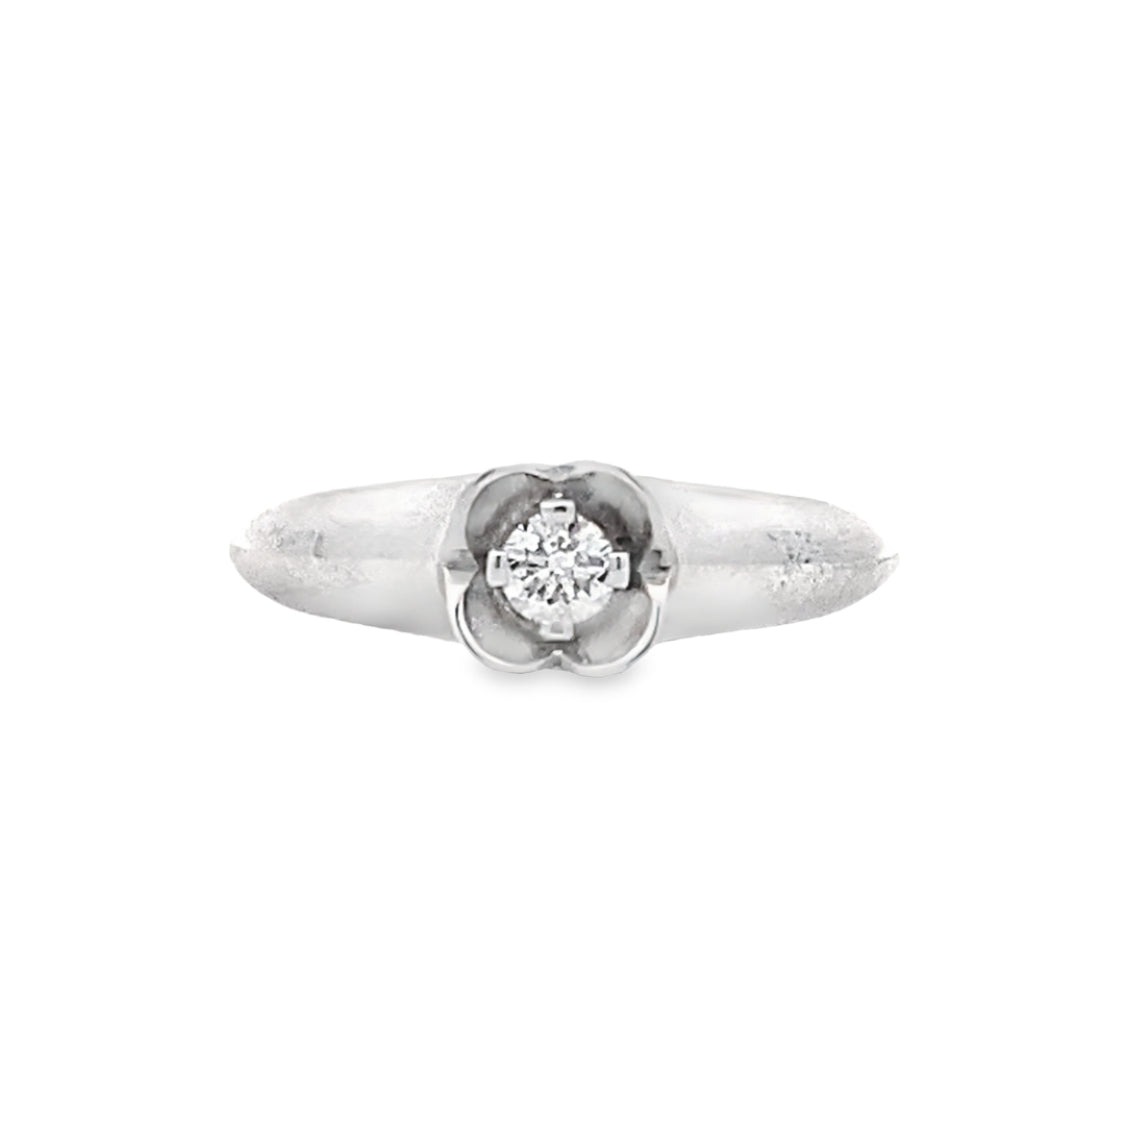 Beeghly & Co. 14 Karat White Gold Solitaire Round Diamond Engagement Ring BCR-35